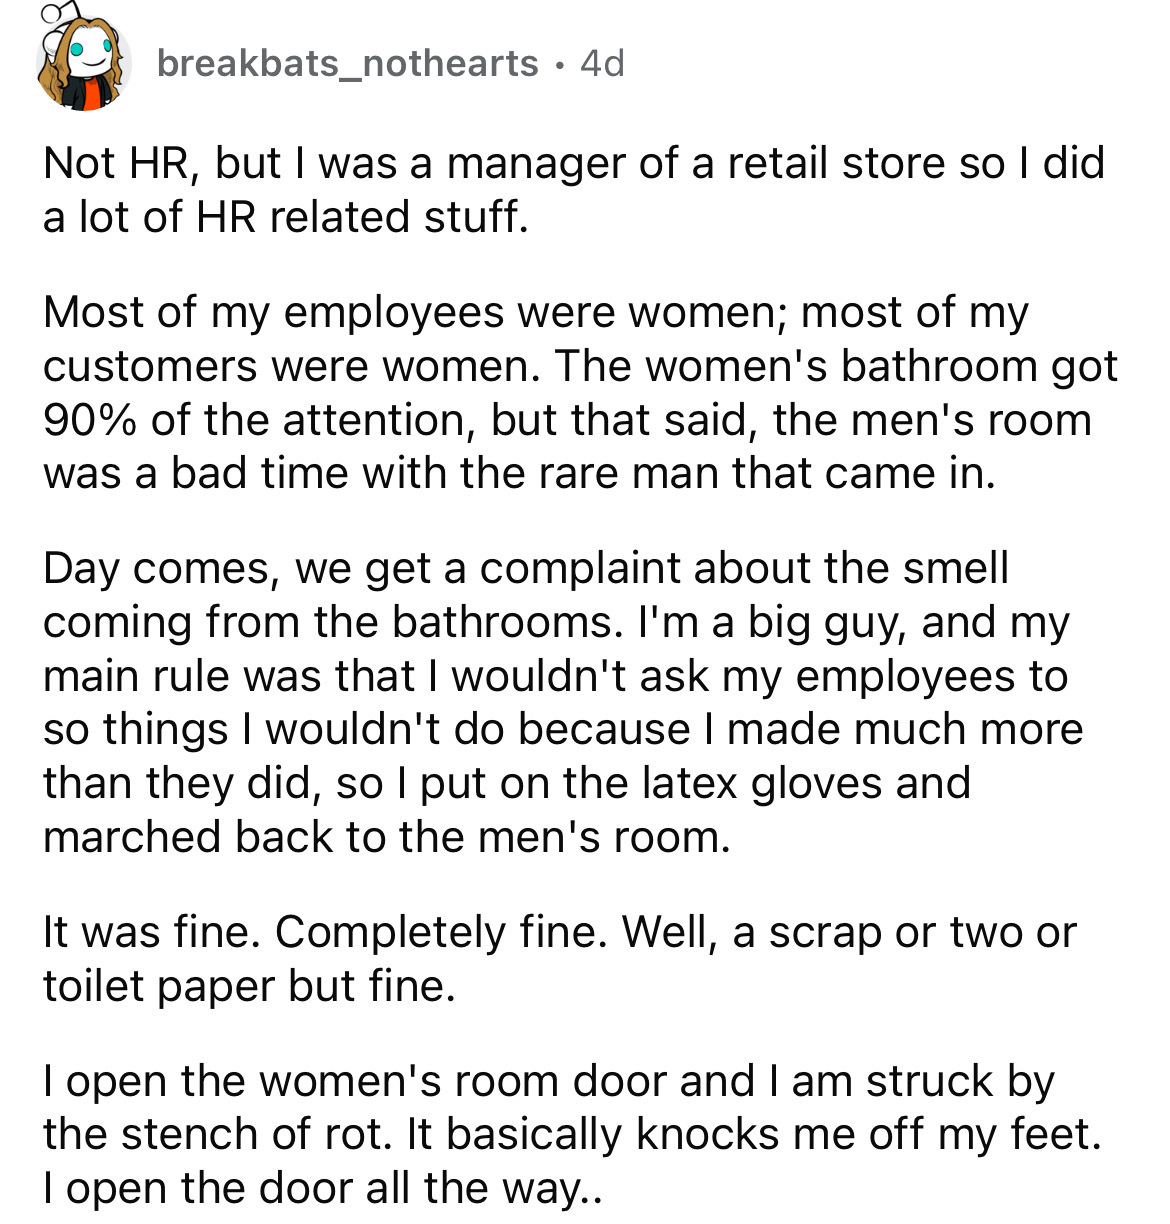 document - breakbats_nothearts 4d Not Hr, but I was a manager of a retail store so I did a lot of Hr related stuff. Most of my employees were women; most of my customers were women. The women's bathroom got 90% of the attention, but that said, the men's r